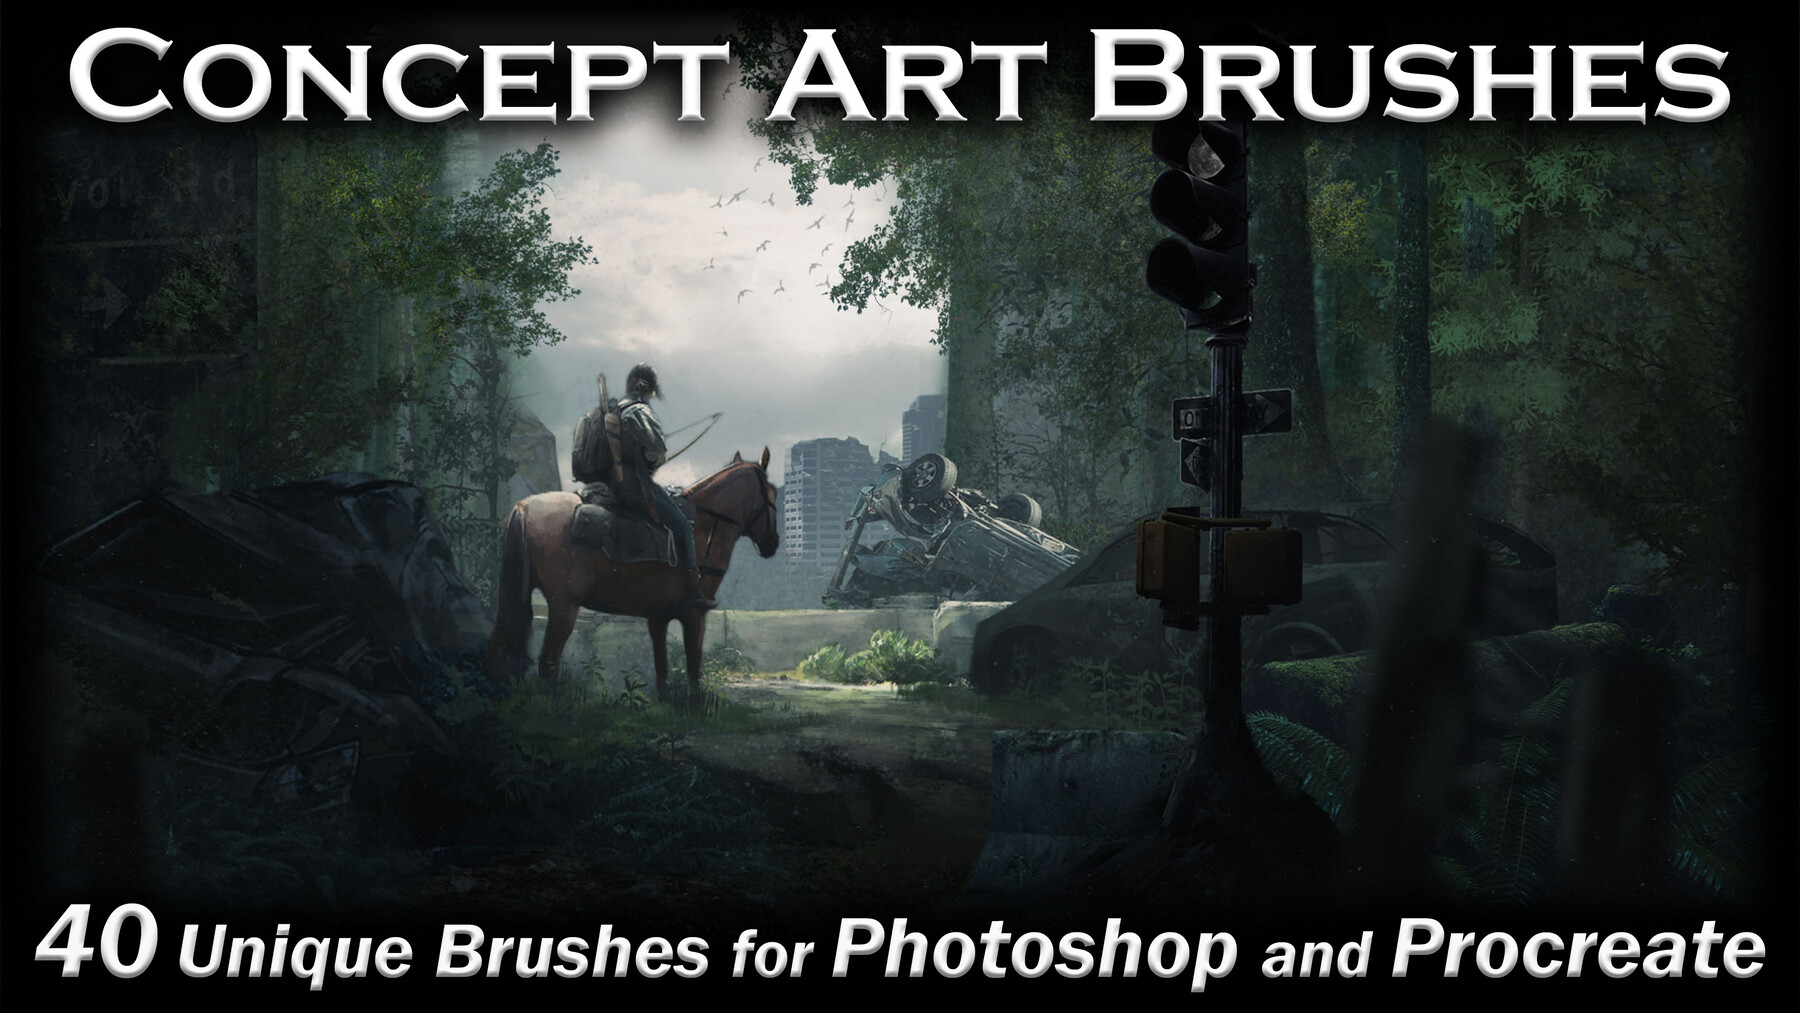 40 Concept Brushes for Photoshop and Procreate (Hand-Painted) - Vol 1